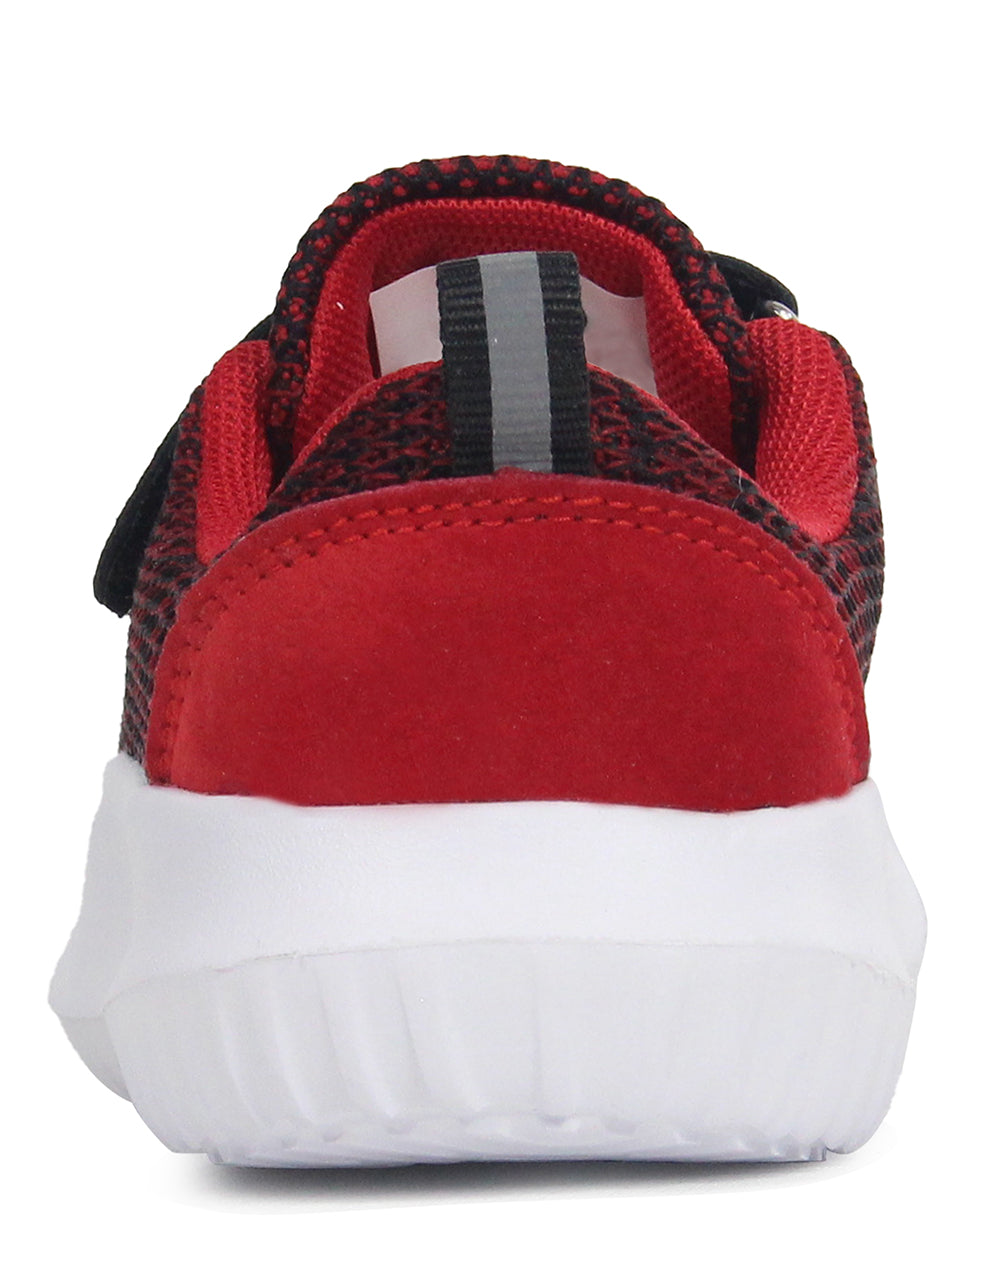 SandQ Glitter Kids Sneakers Dama Red Tennis Shoes For Boys And Girls, Black  Sport Footwear, Casual Paillet For Kids NewHKD230701 From Meck, $16.73 |  DHgate.Com